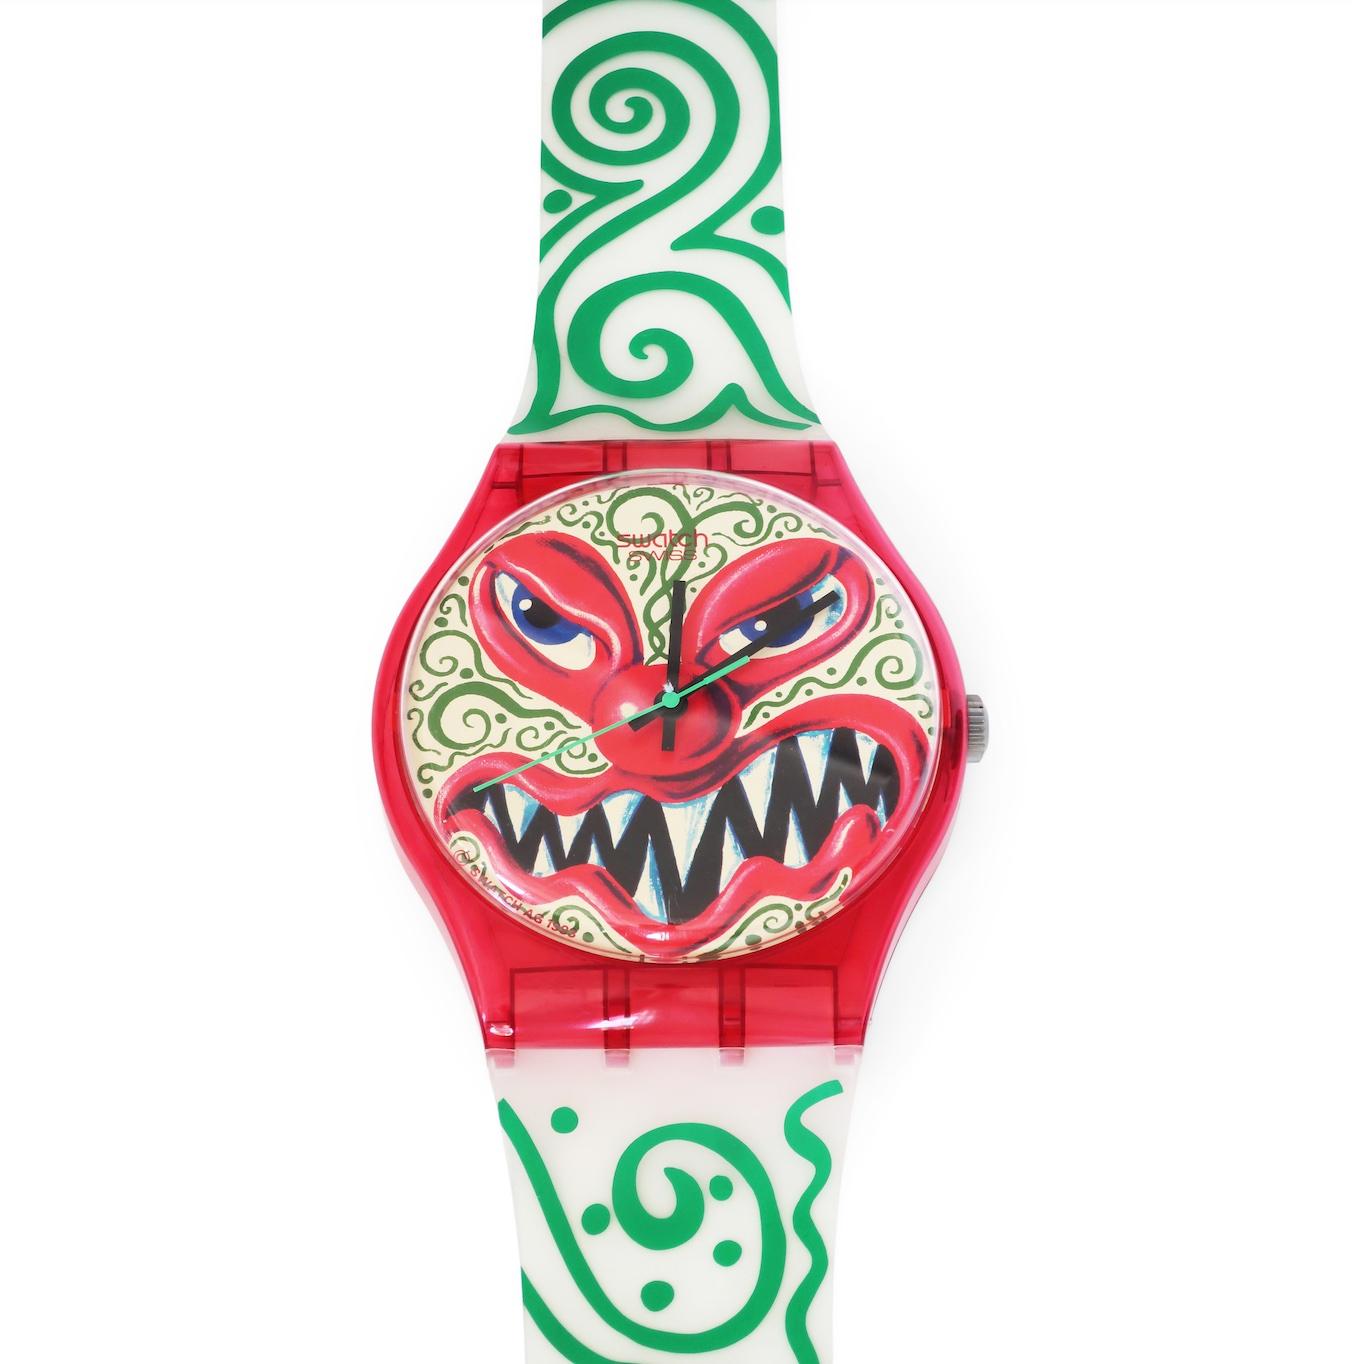 A charismatic and sinister design from 1993 by American artist Kenny Scharf for Swatch. Produced as a wristwatch and also in this Swatch Maxi over-sized seven foot tall wall clock version. Scharf's work is humorous, pushes boundaries, and is always